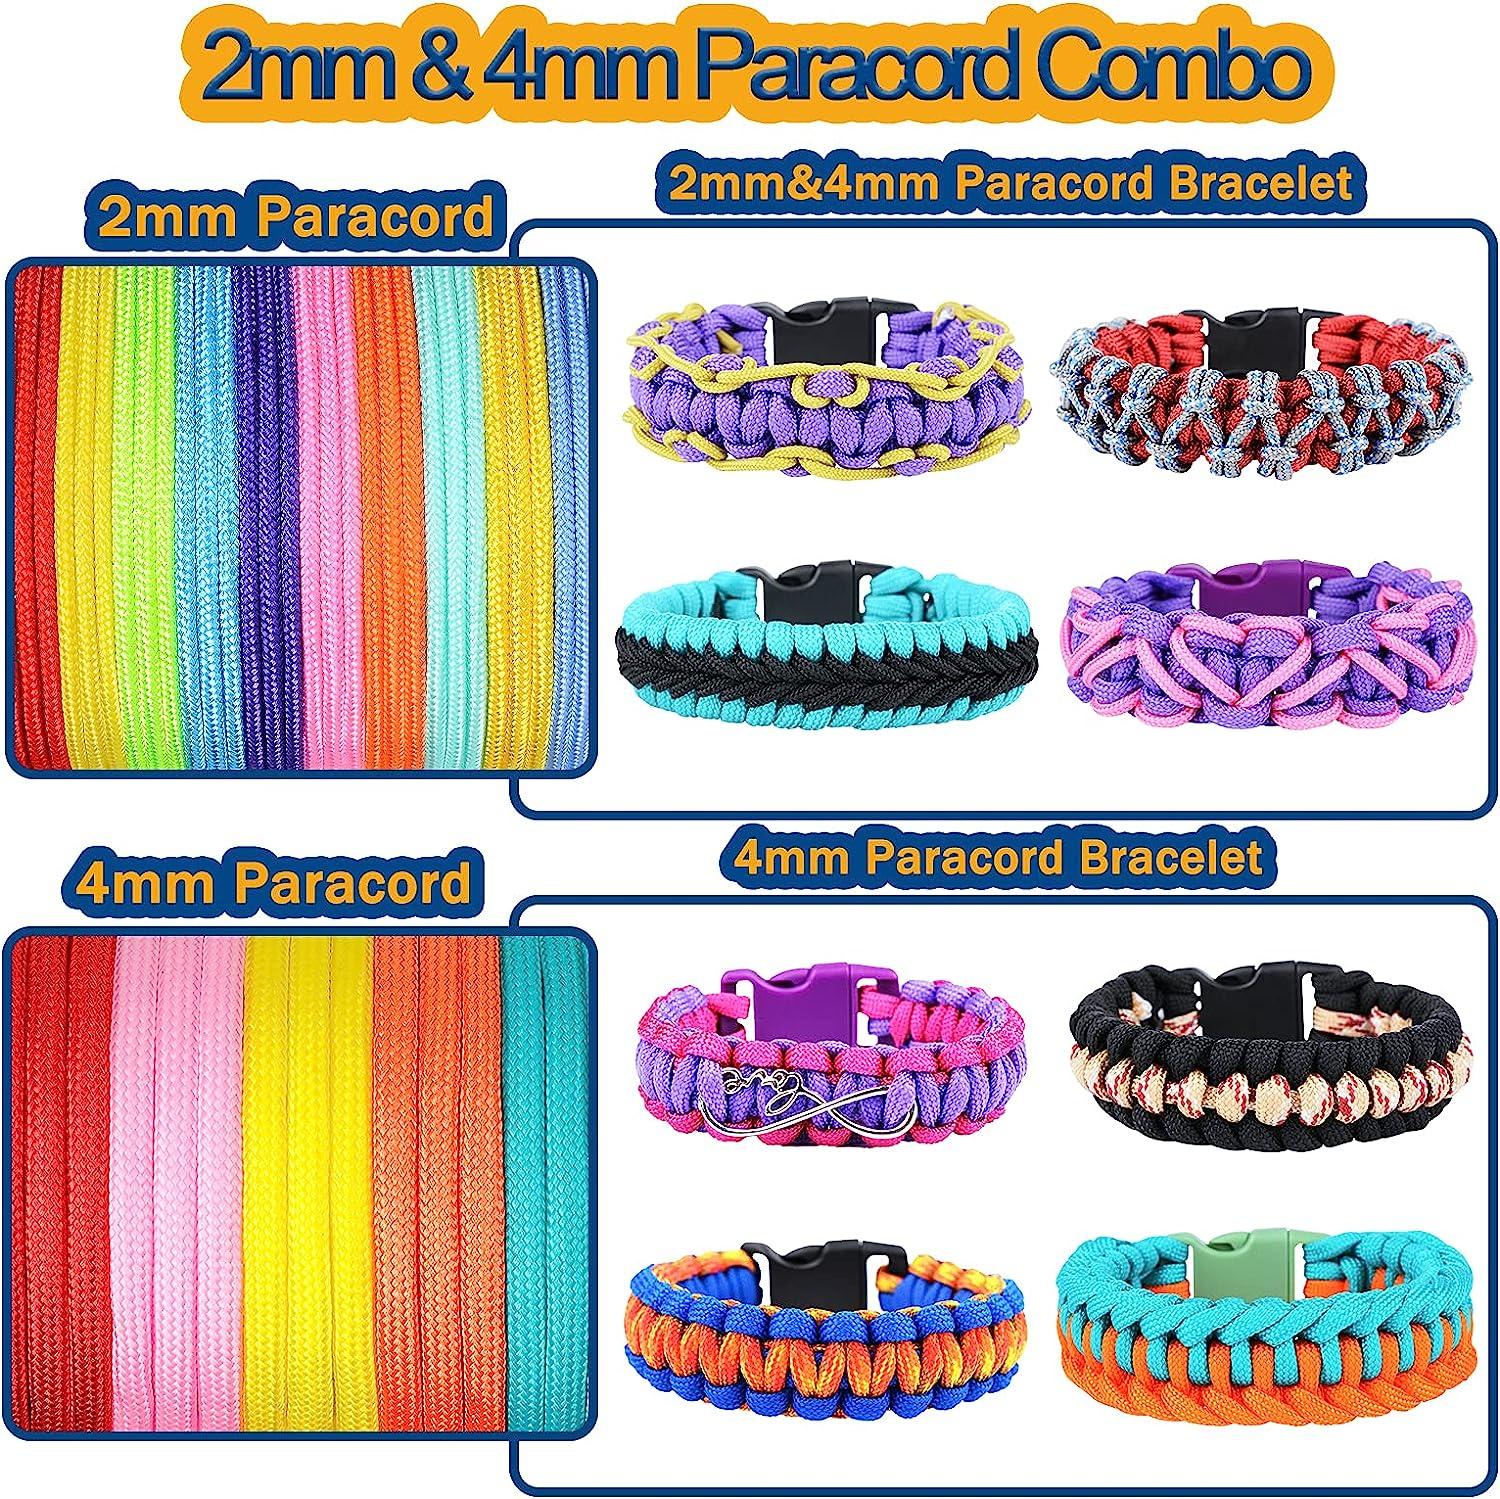 MONOBIN Paracord Bracelets Kit - 30 Colors 4mm Paracord & 6 Colors 2mm  Paracord with FID Paracord Craft Kit with Complete Accessories for Kids and  Adult Making Various Paracord Projects Multicolor